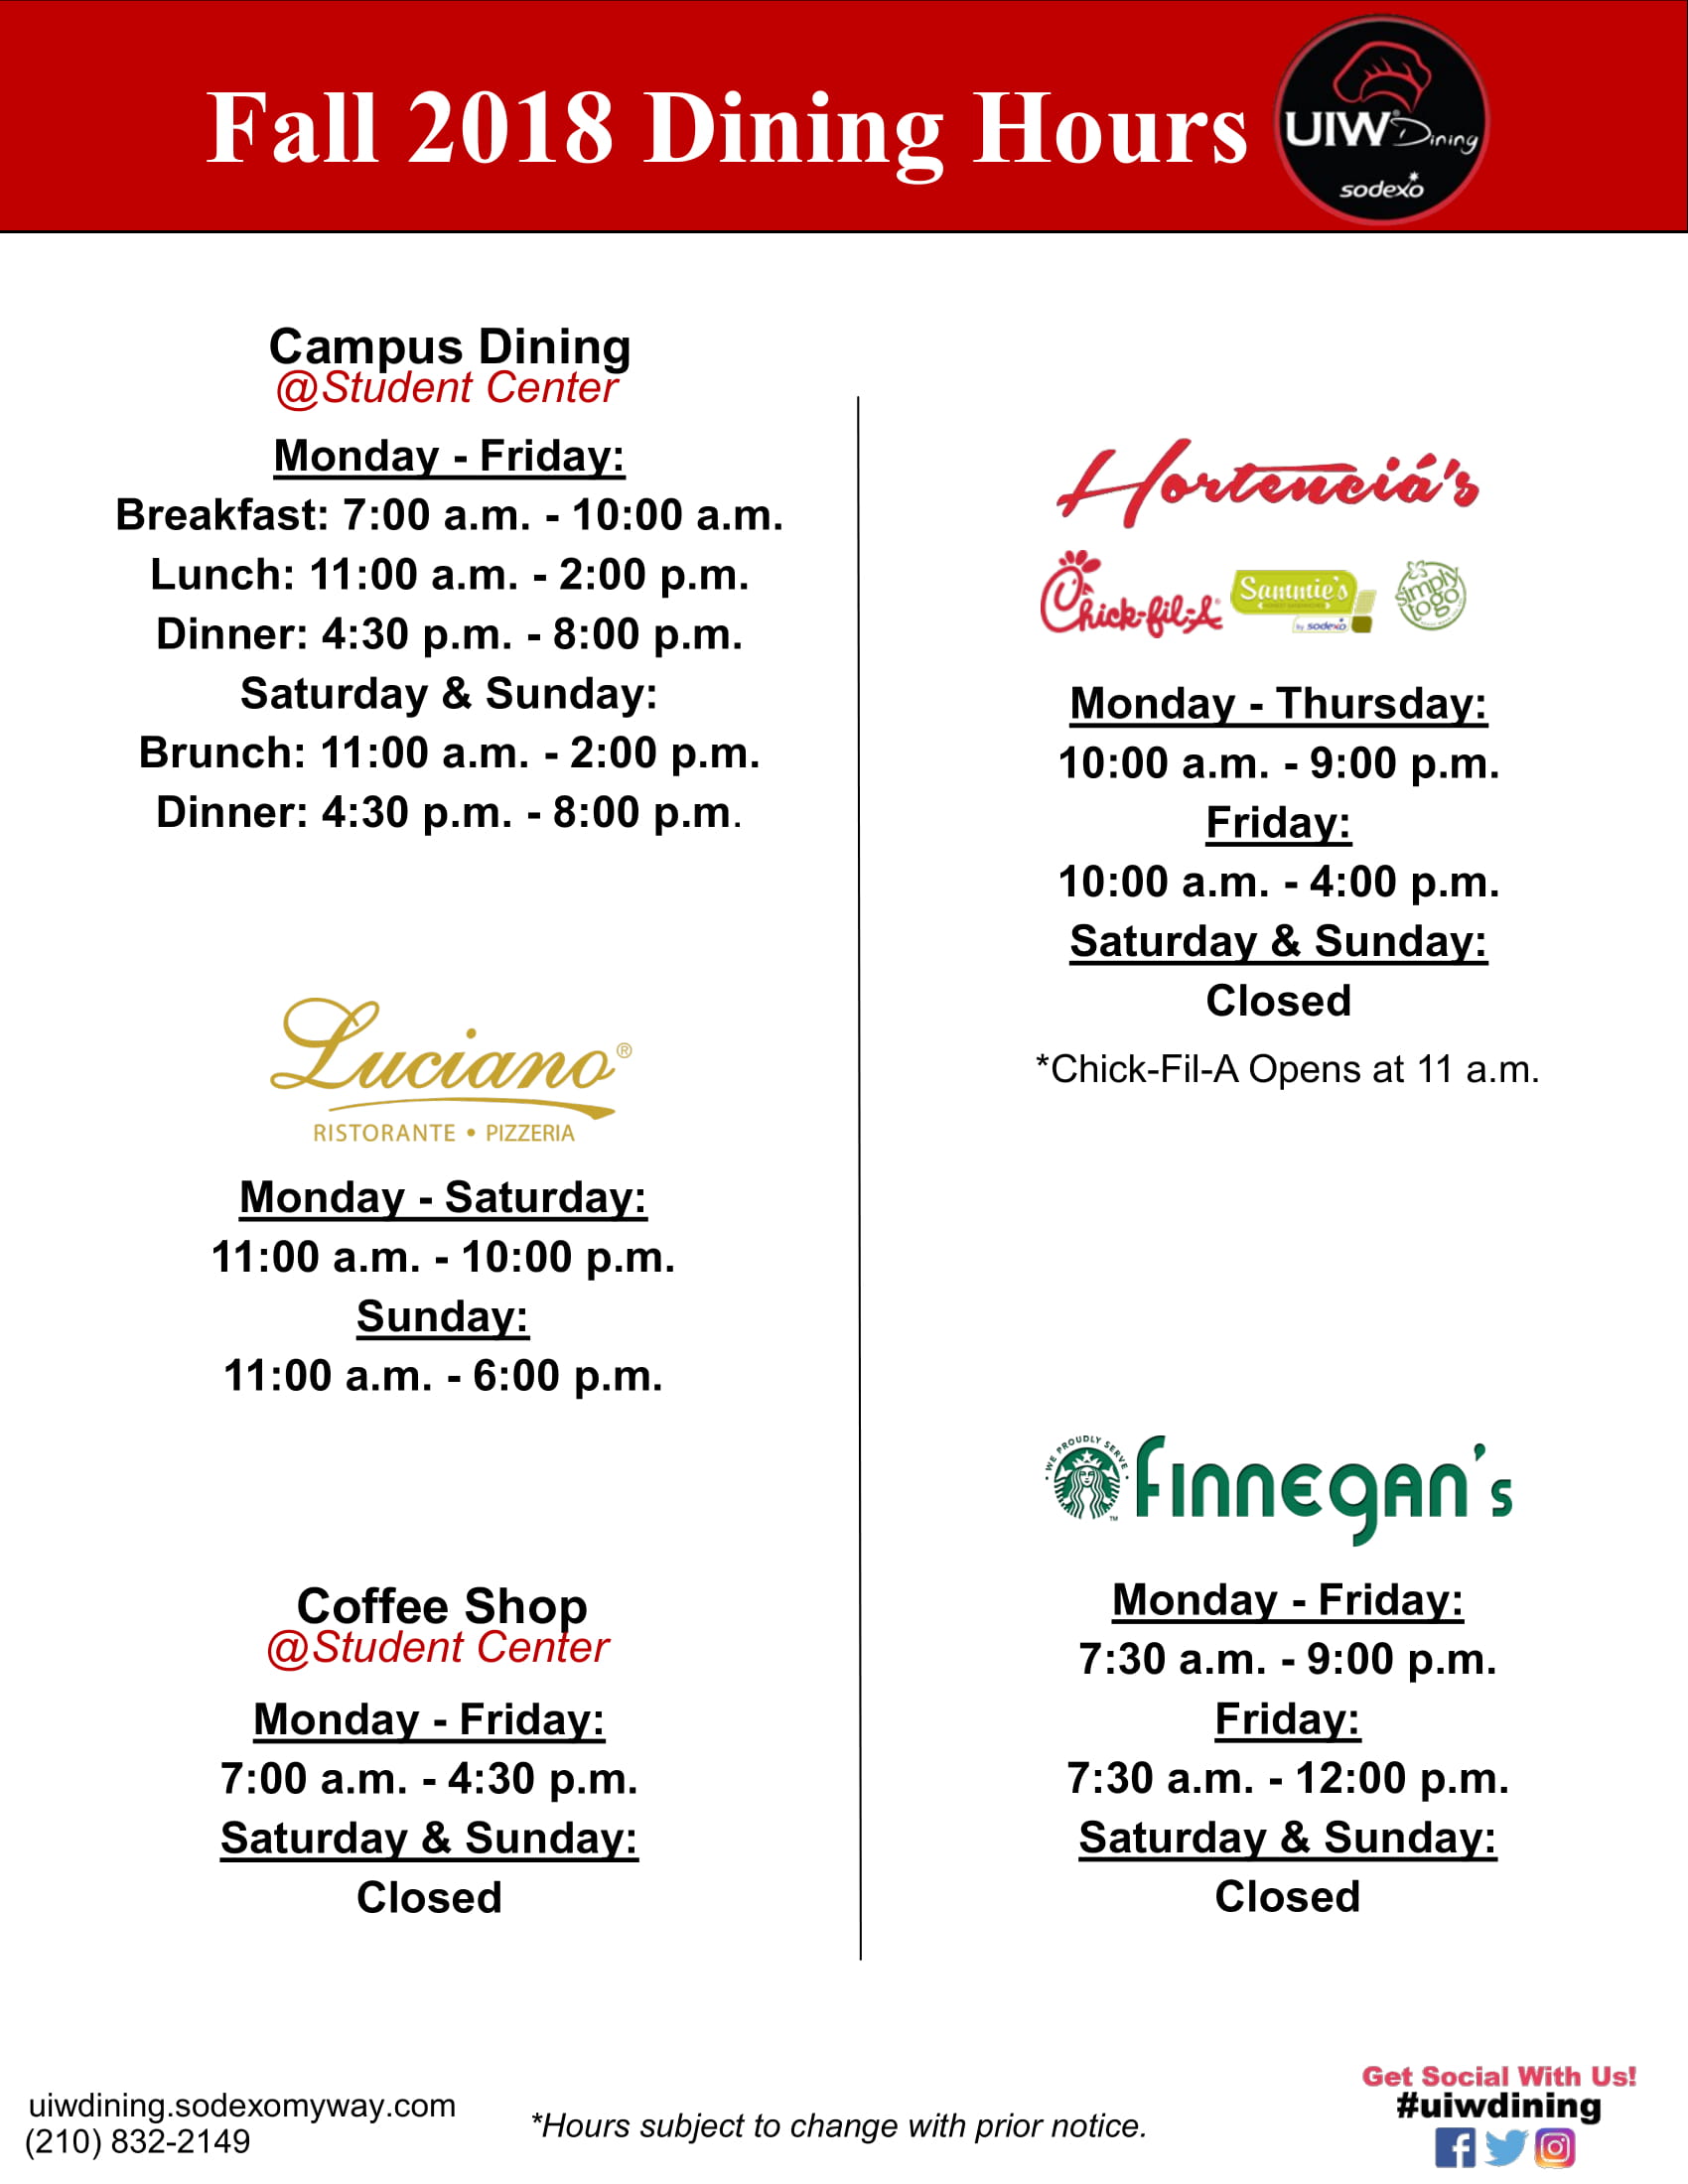 Fall Campus Dining Hours UIW 2018